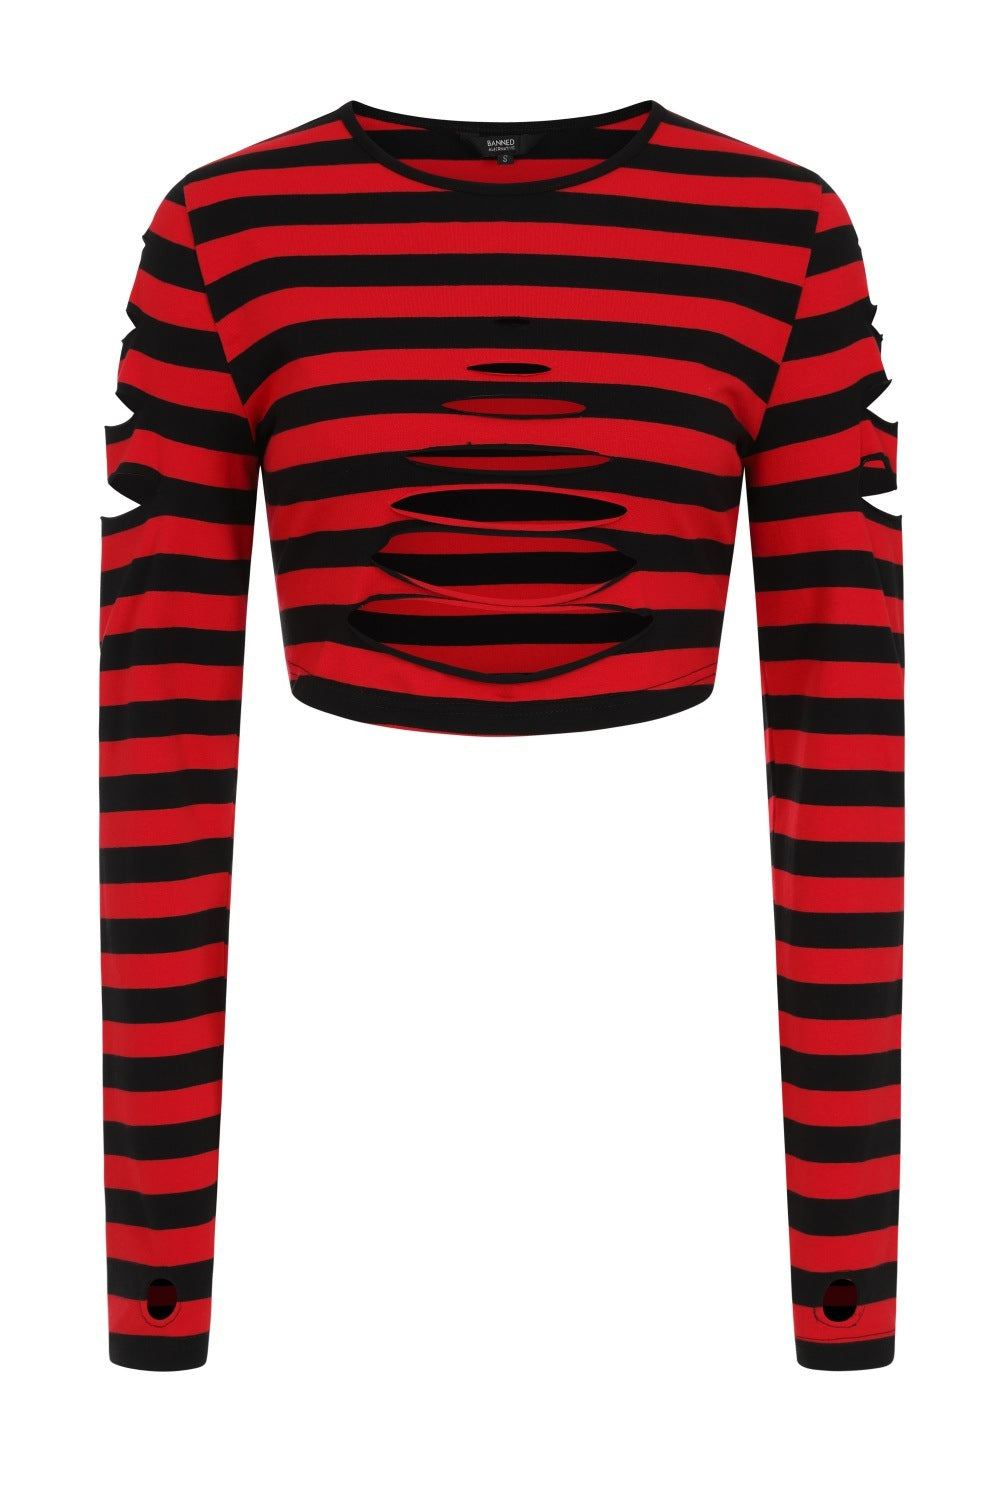 Red and black stripe crop top with rip designs, long sleeves and thumb holes